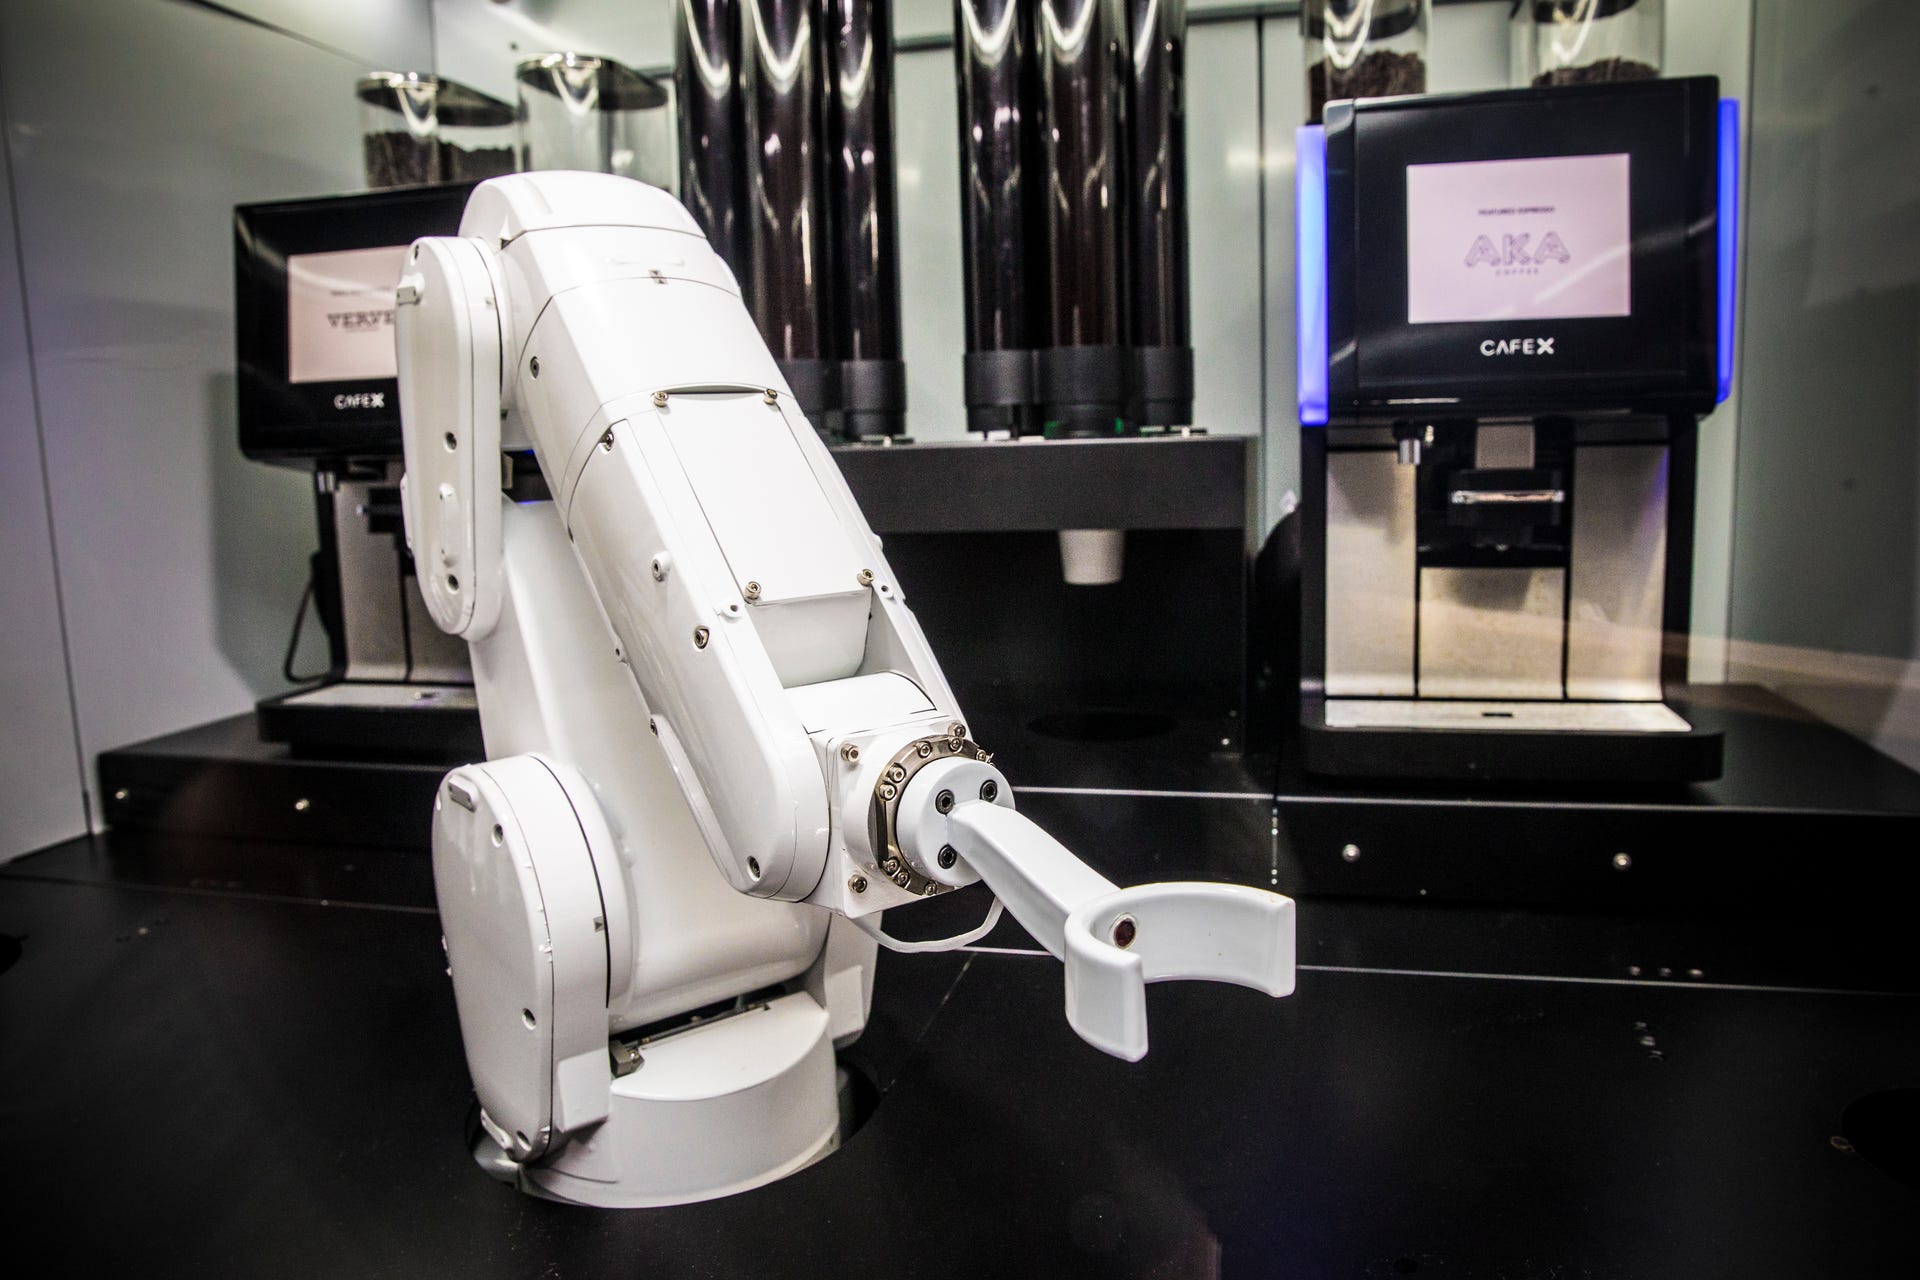 ​Cafe X adapted industrial robots to make coffee. This one in San Francisco is called Gordon.